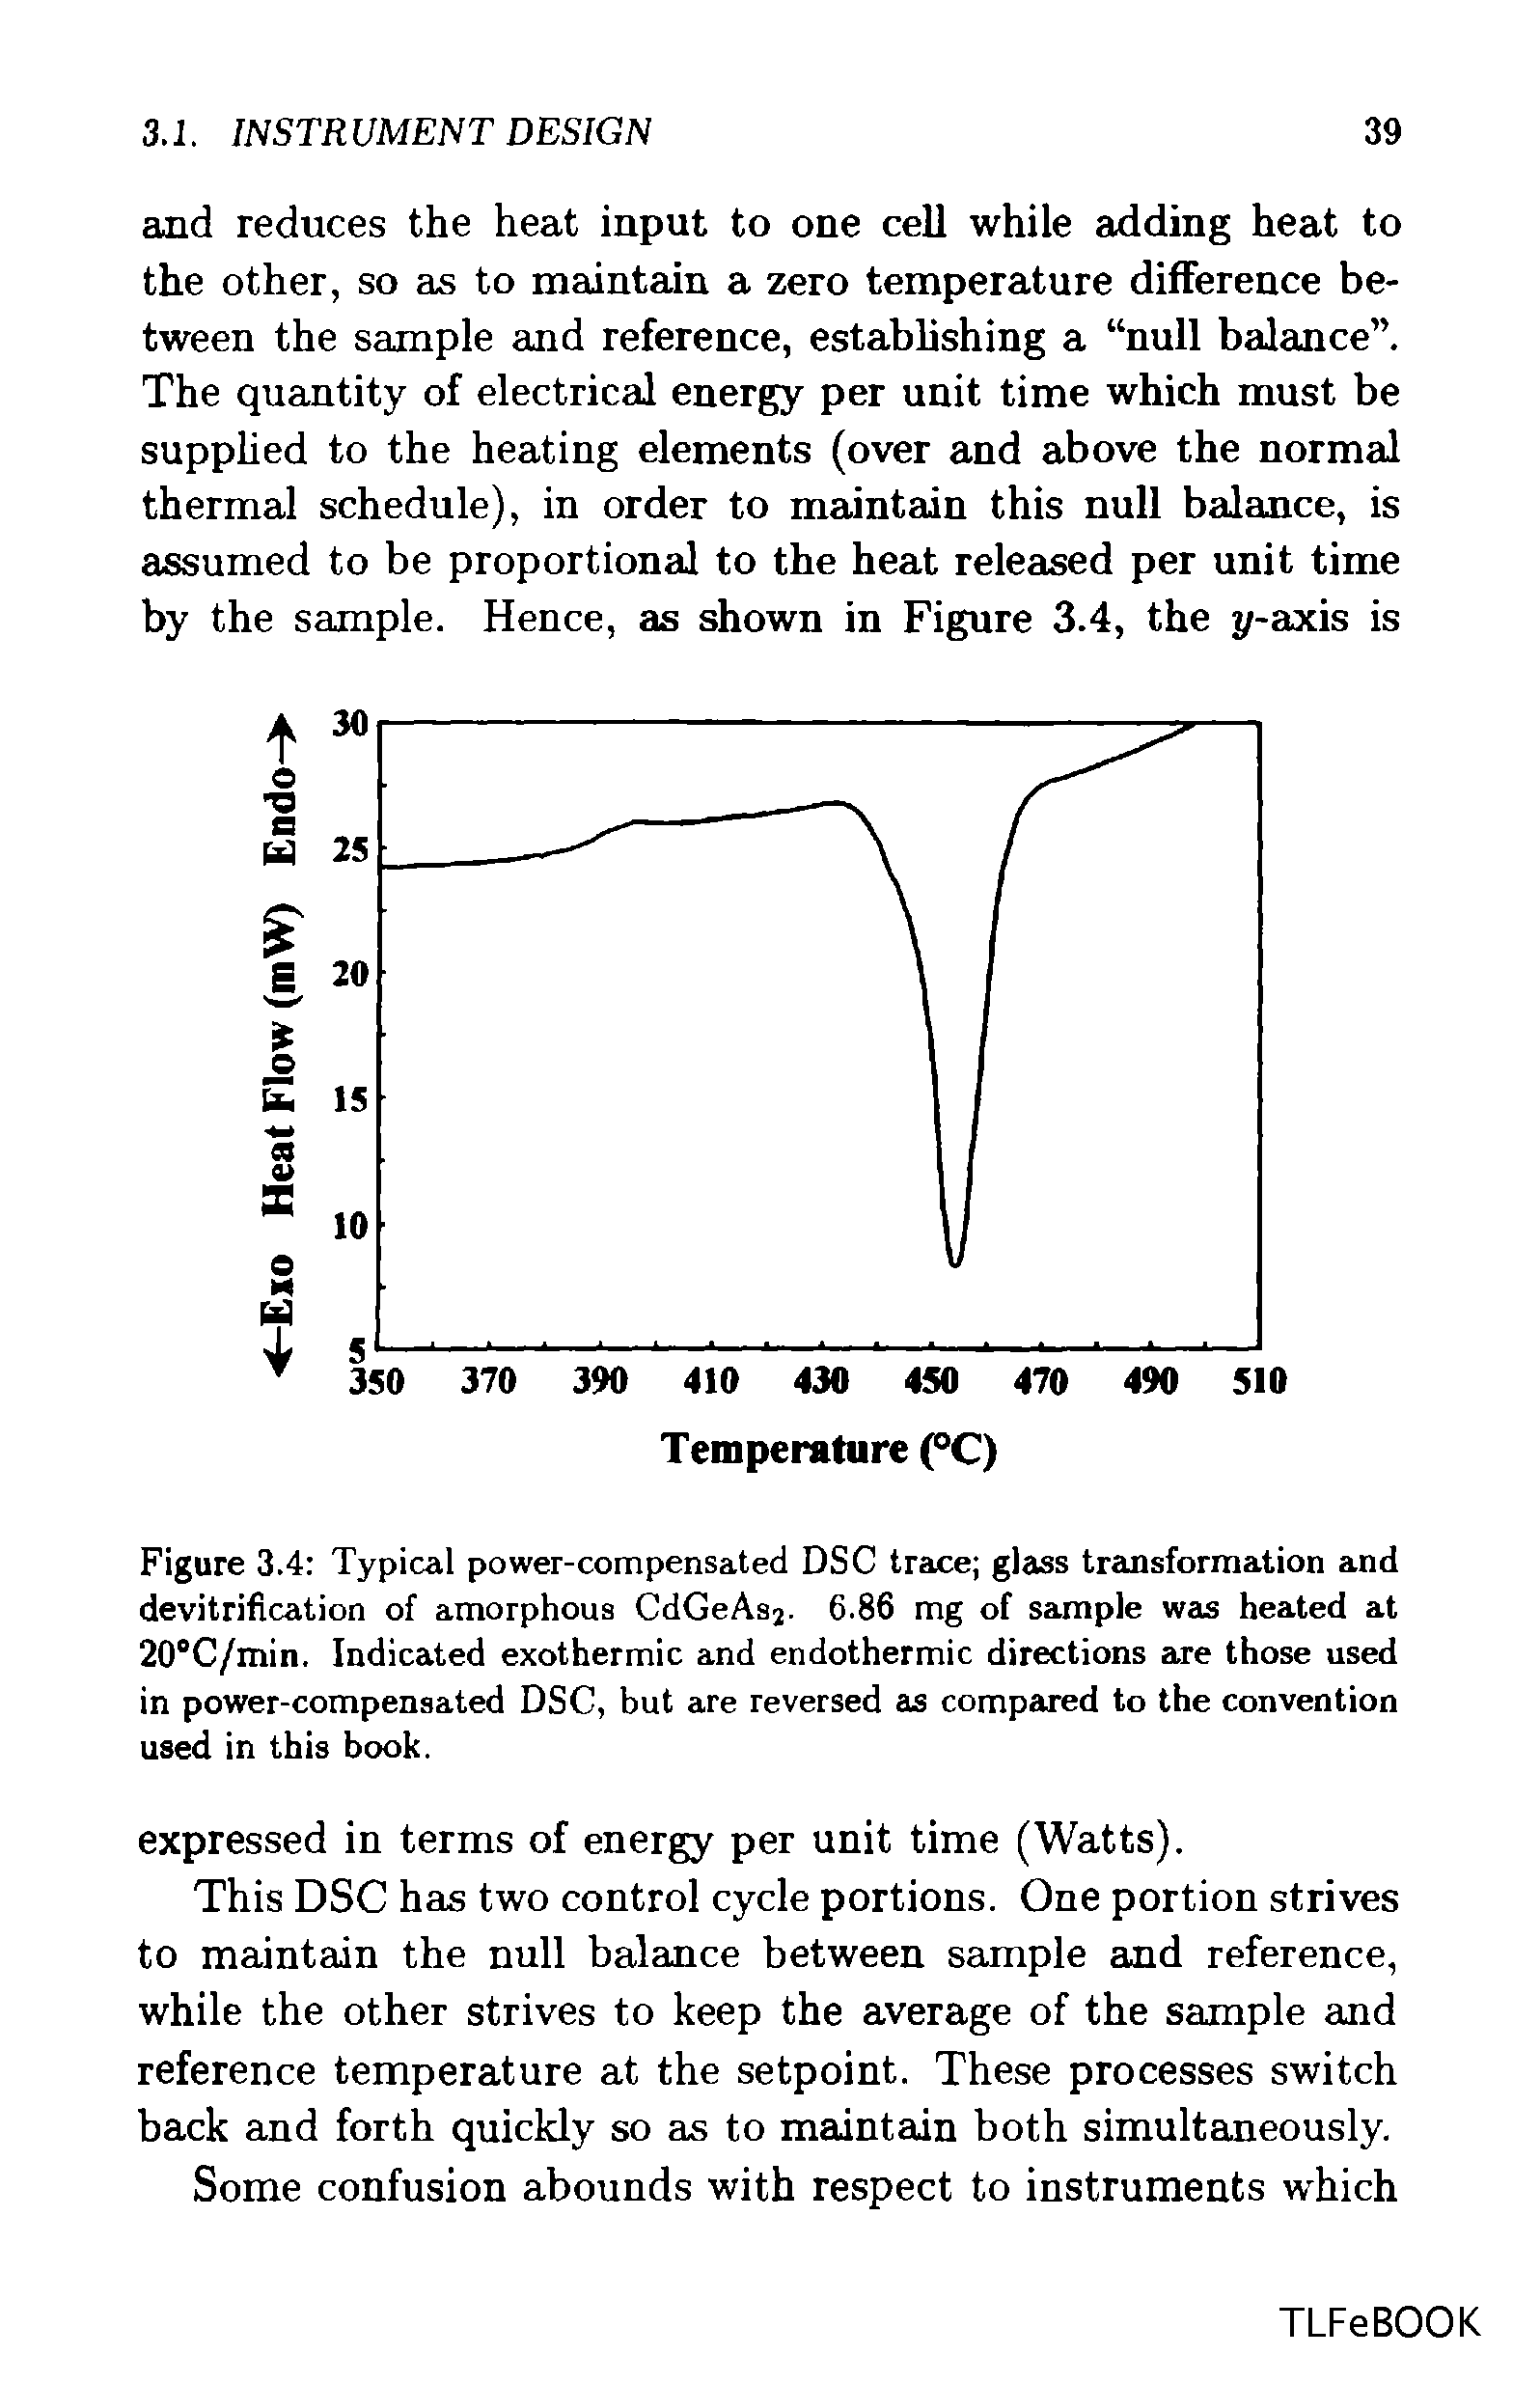 Figure 3.4 Typical power-compensated DSC trace glass transformation and devitrification of amorphous CdGeAsj. 6.86 mg of sample was heated at 20°C/min. Indicated exothermic and endothermic directions are those used in power-compensated DSC, but are reversed as compared to the convention used in this book.